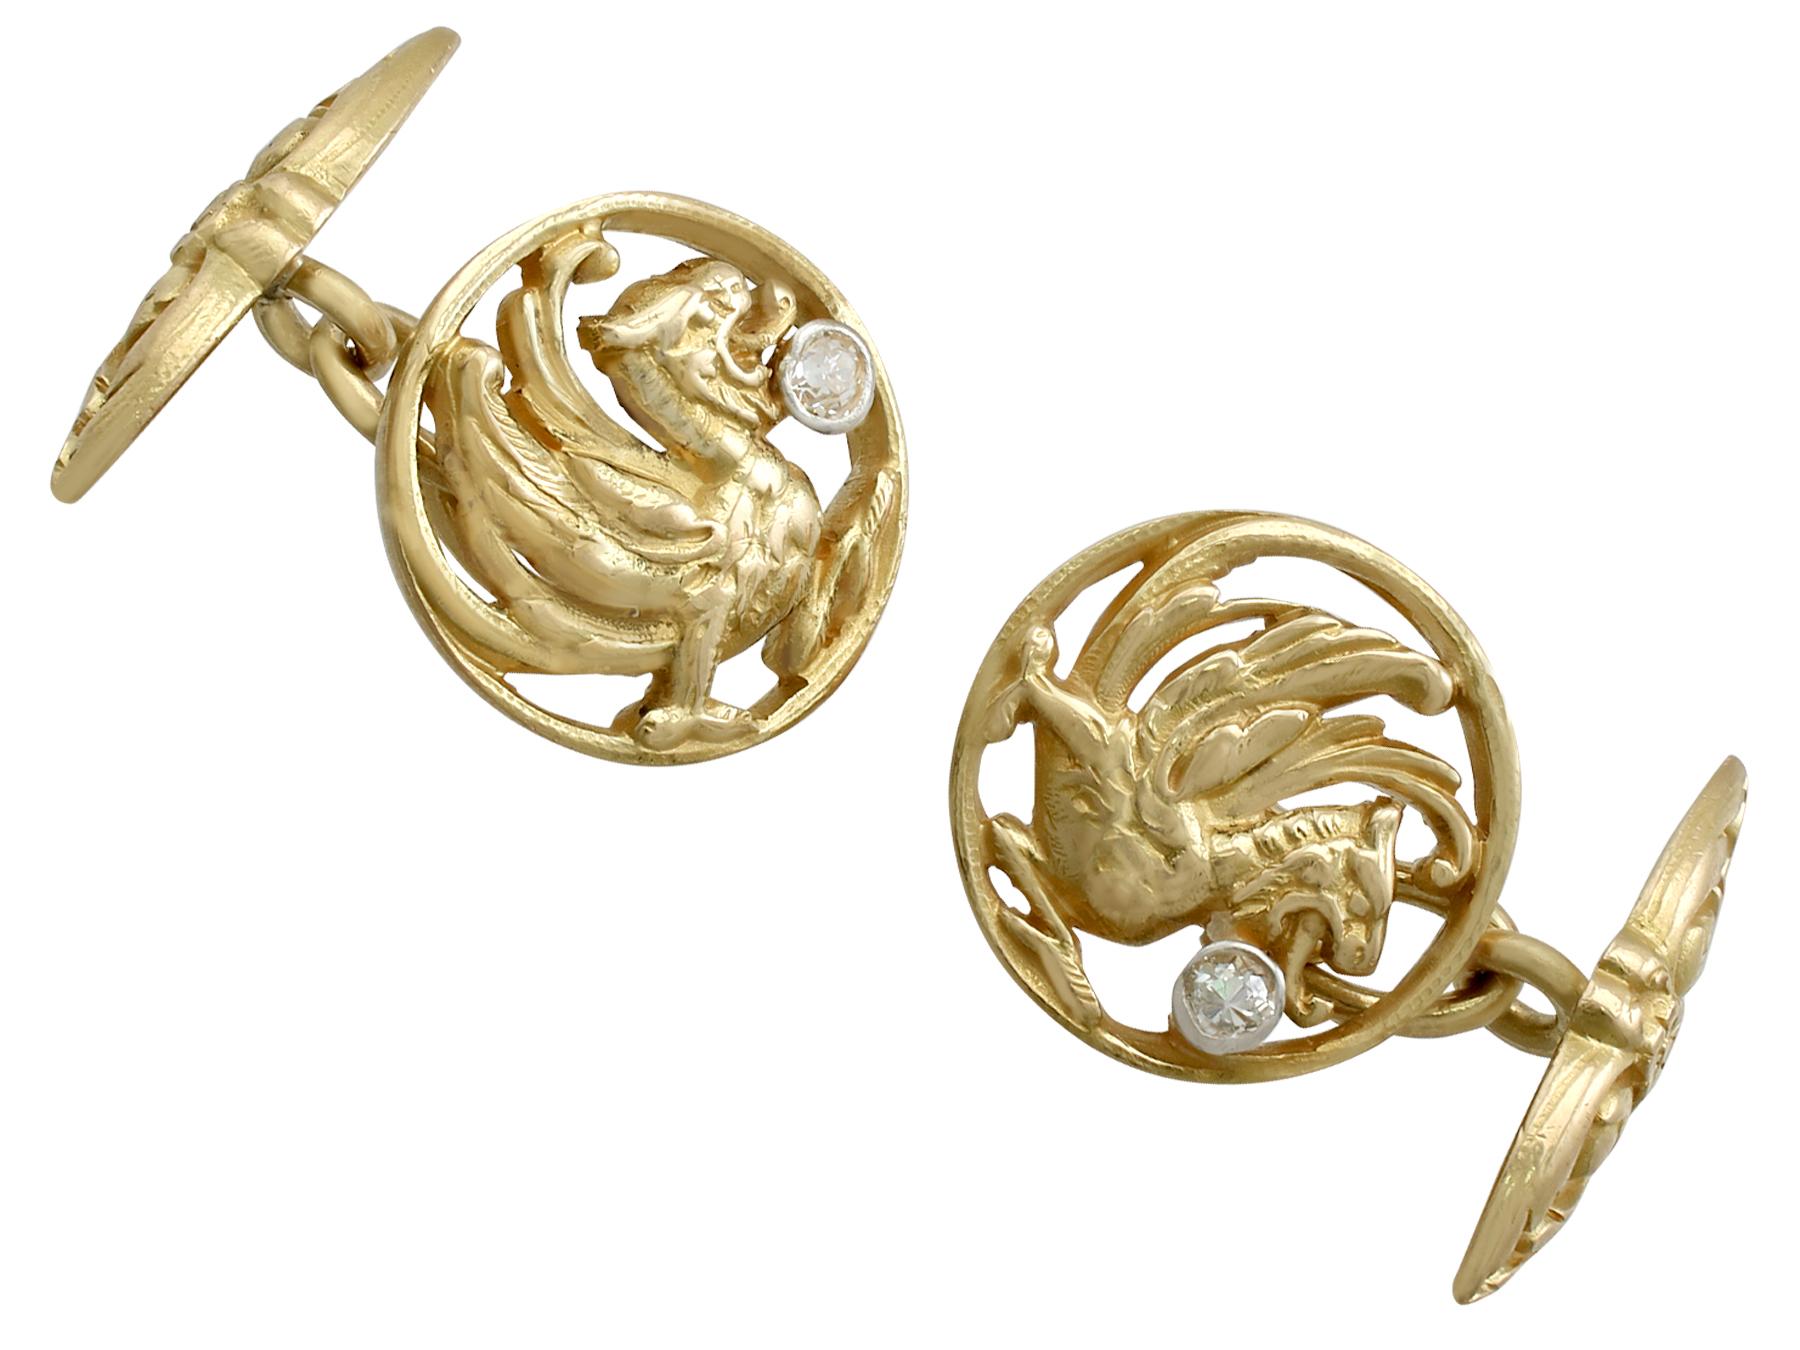 A stunning pair of antique French 0.10 carat diamond and 18 karat yellow gold cufflinks; part of our diverse antique estate jewelry collections.

These fine and impressive antique gold and diamond cufflinks have been crafted in 18k yellow gold with